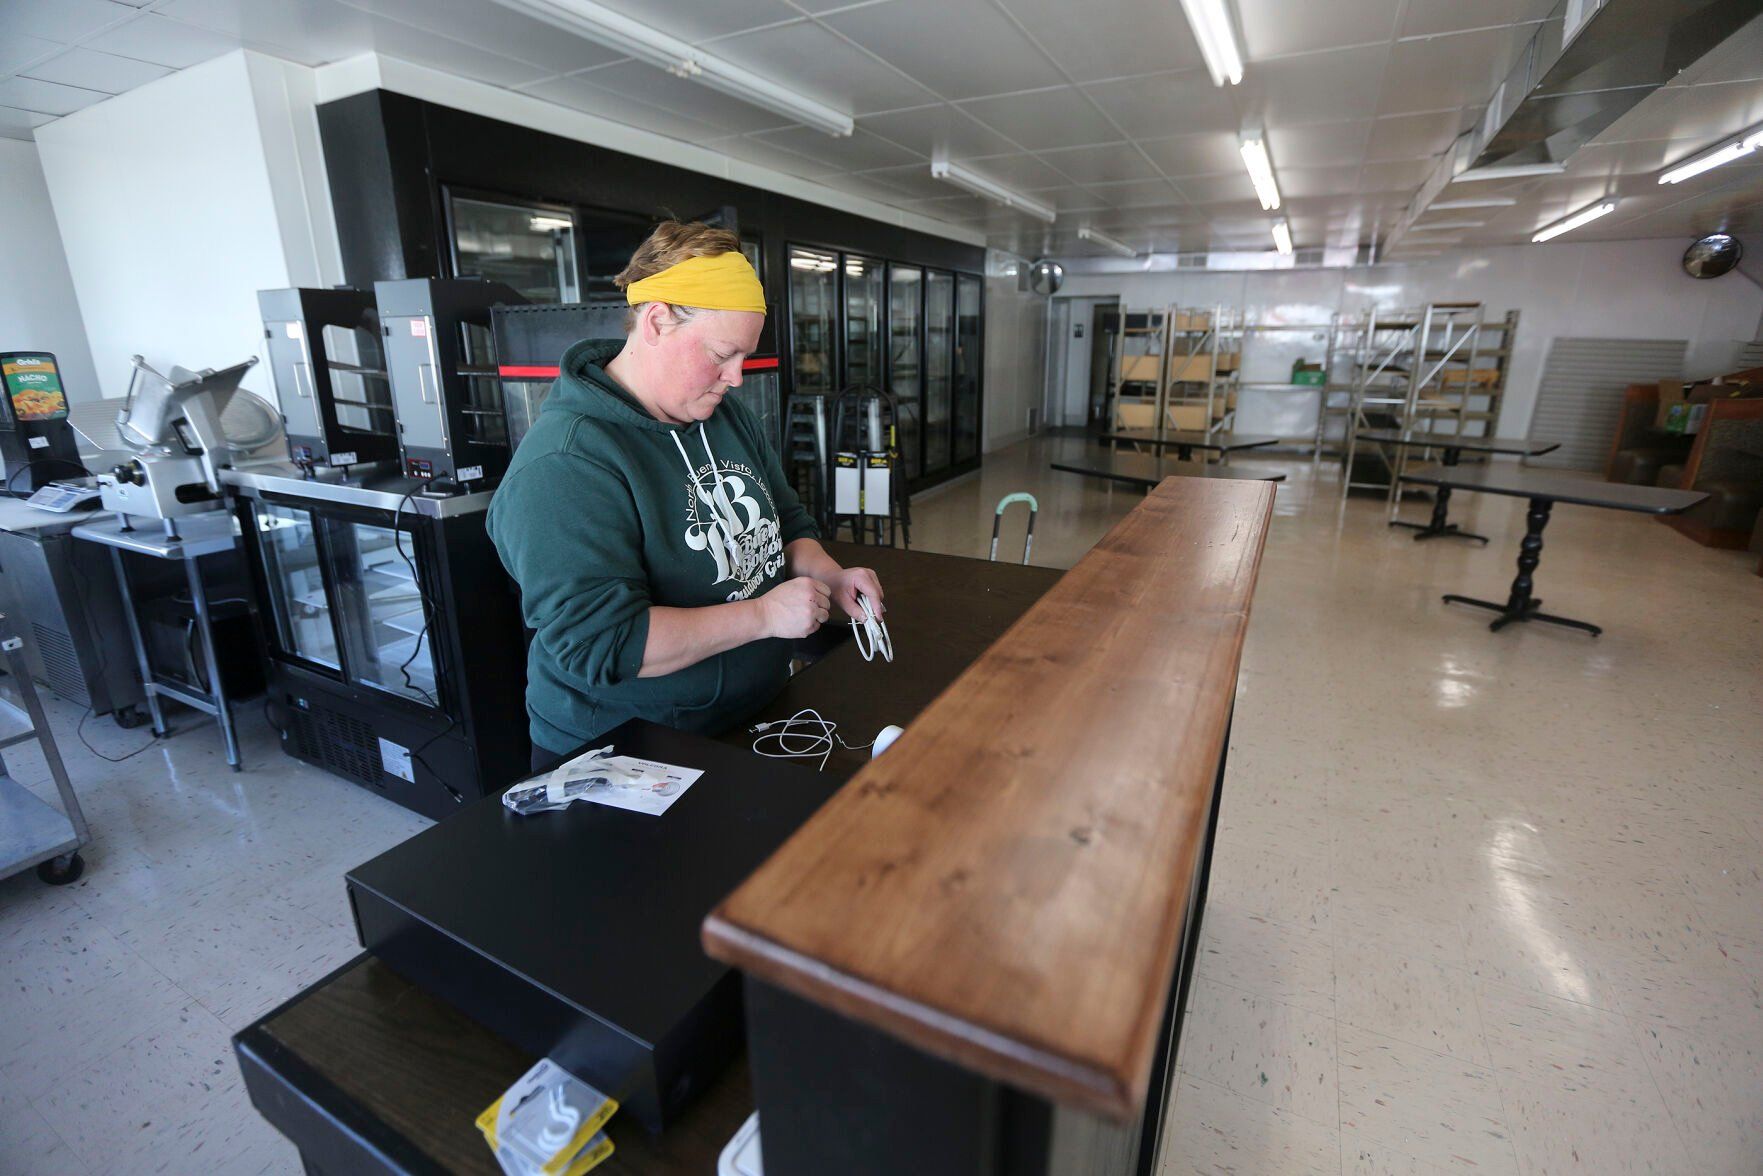 Erin Potter, co-owner of Buenie Bottoms Grill & Market, works on the inside of the new business in Holy Cross, Iowa, on April 10, 2023.    PHOTO CREDIT: Dave Kettering